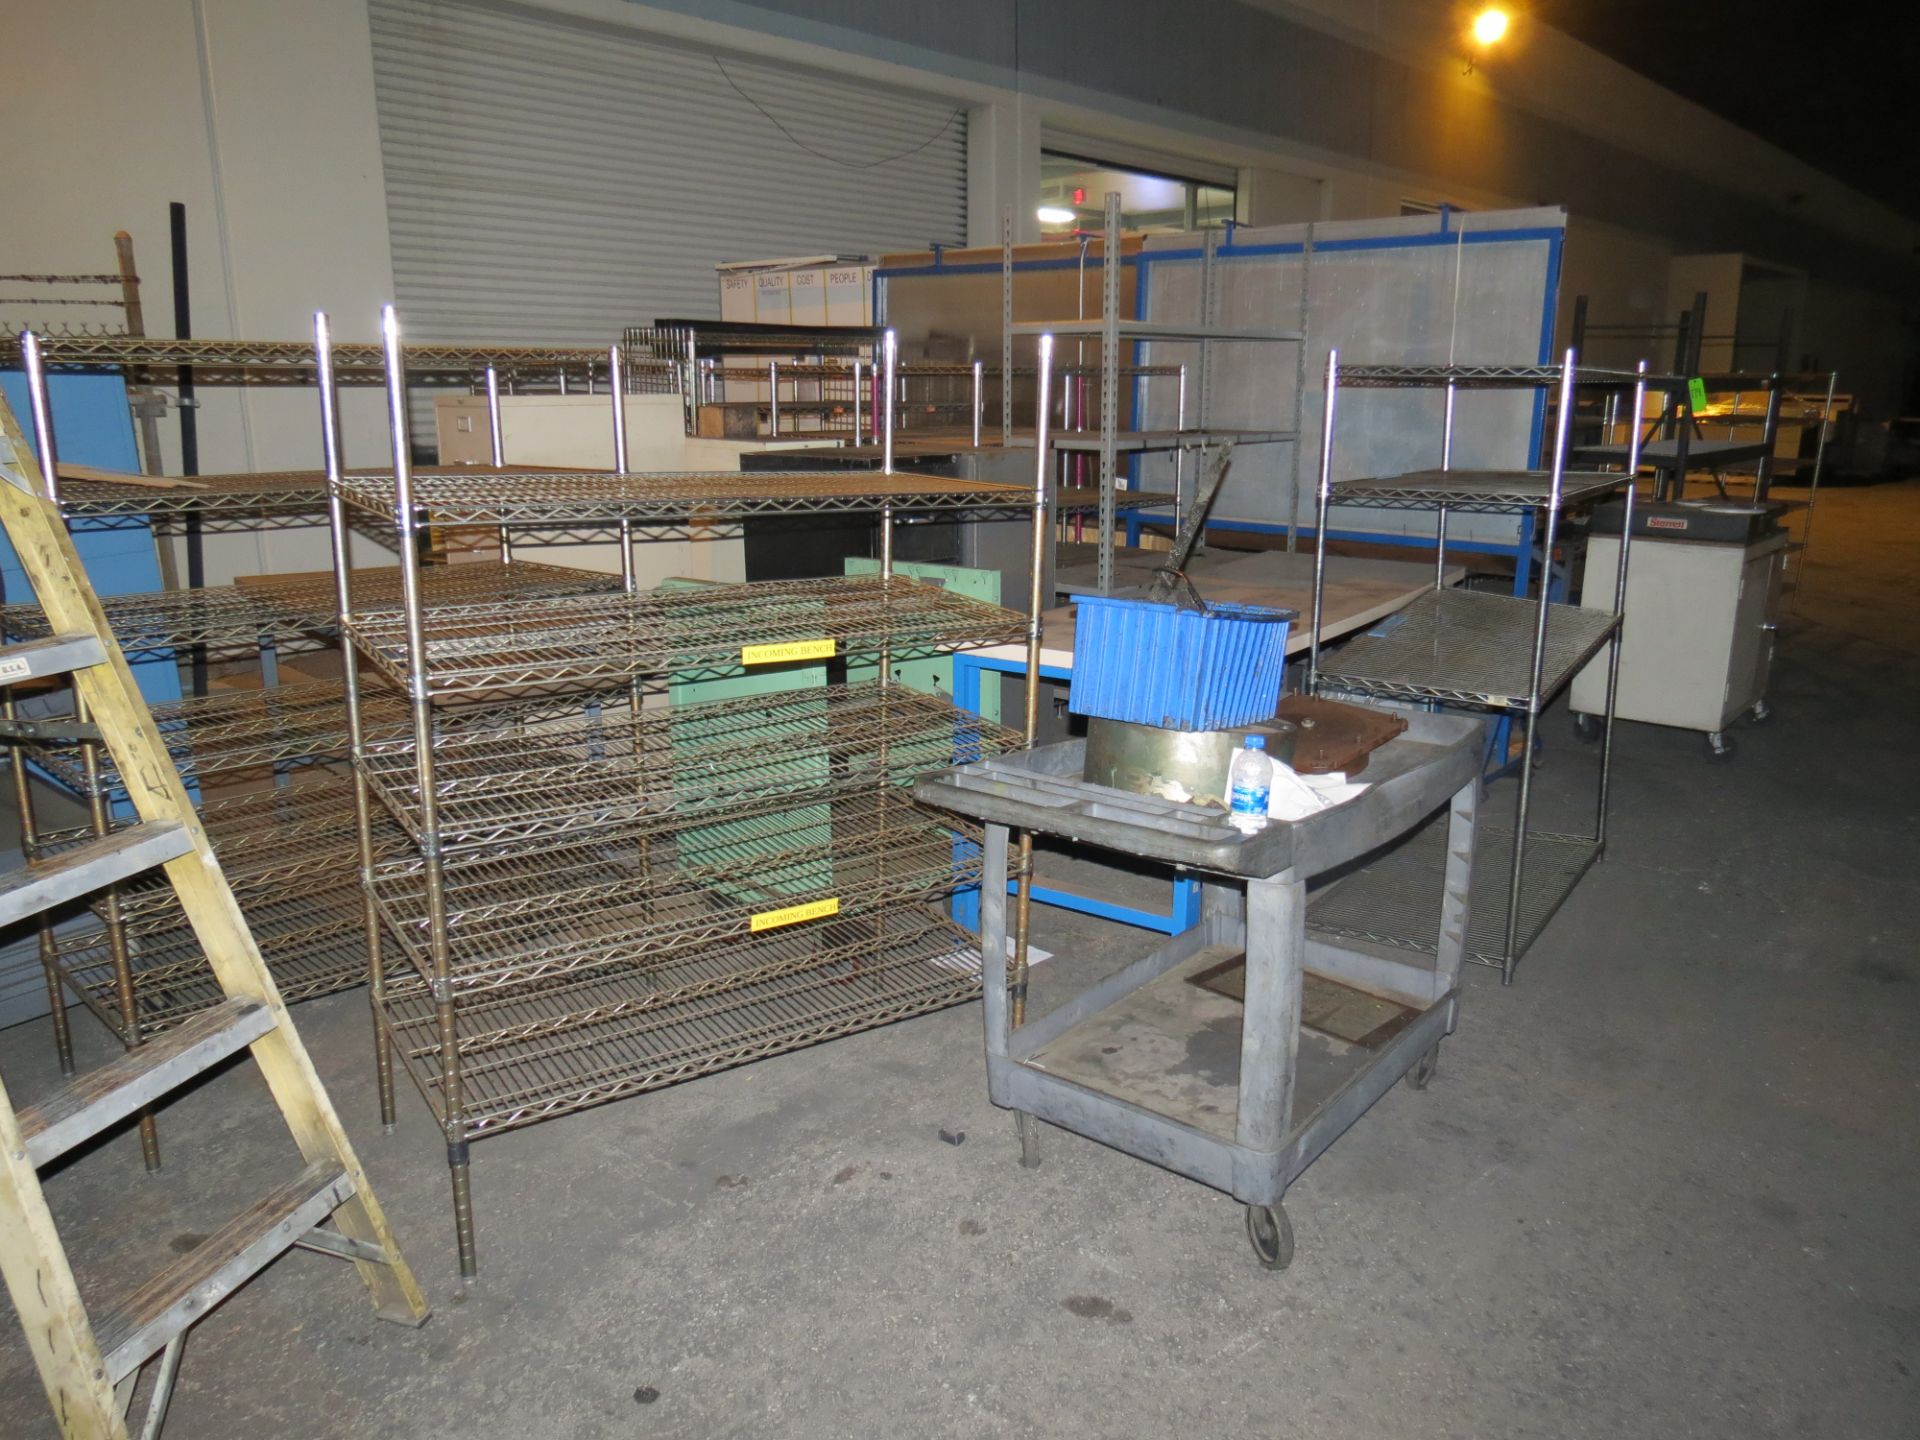 LOT OF ASSORTED CHROME WIRE RACKS, METAL SHELVES, CABINETS AND WHITE BOARDS, NO PRECISION SURFACE - Image 3 of 4